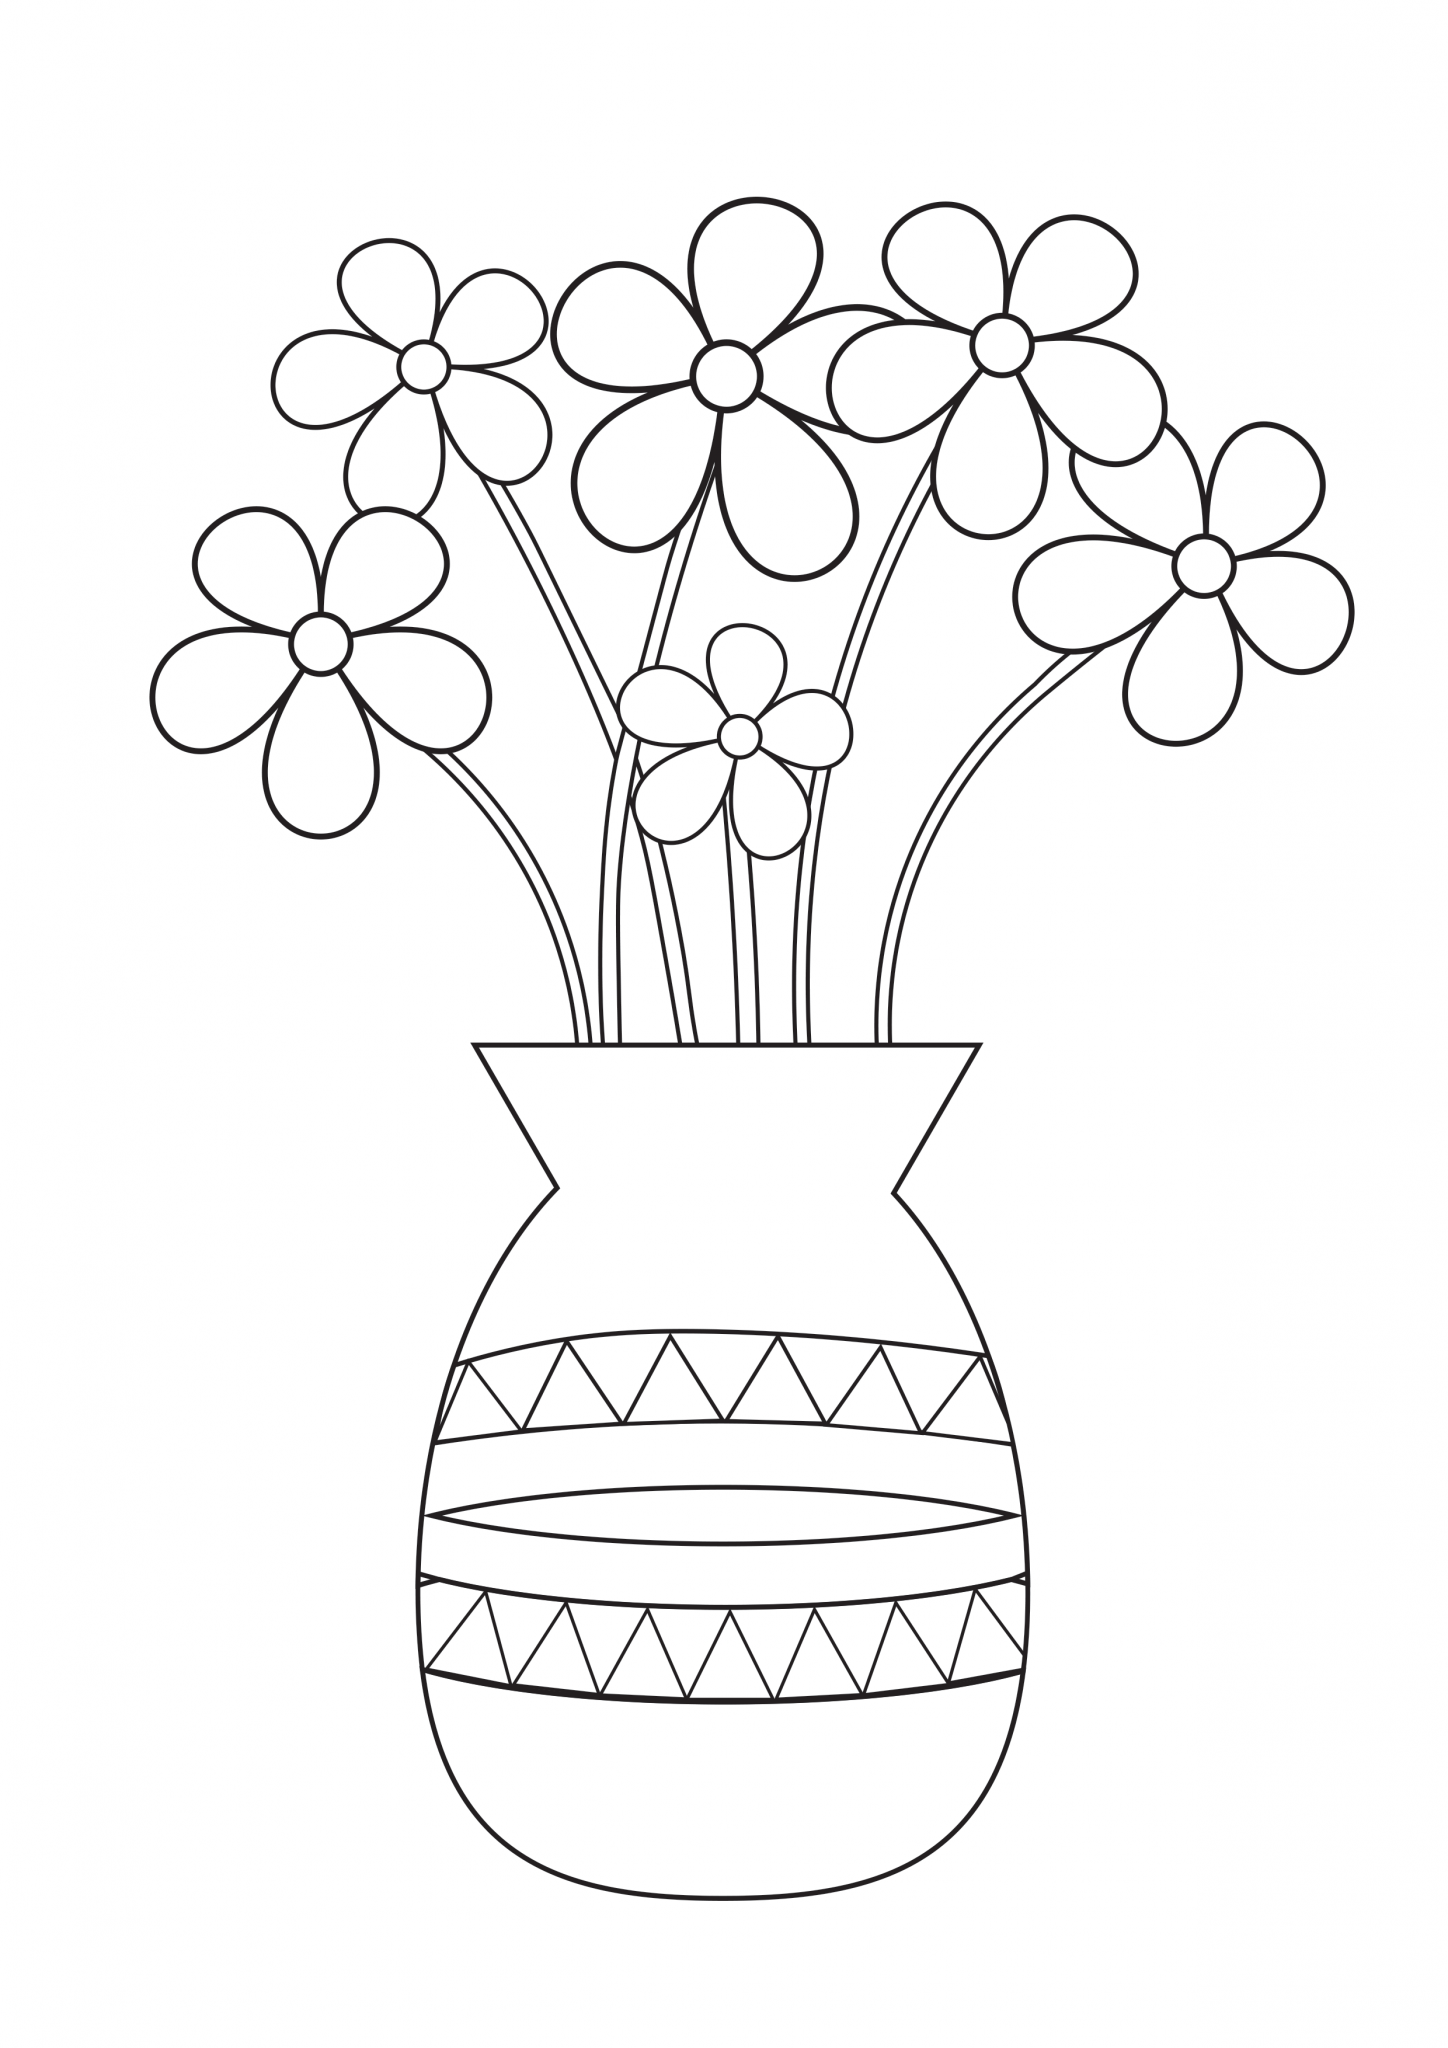 Flowers in a vase - Coloring pages